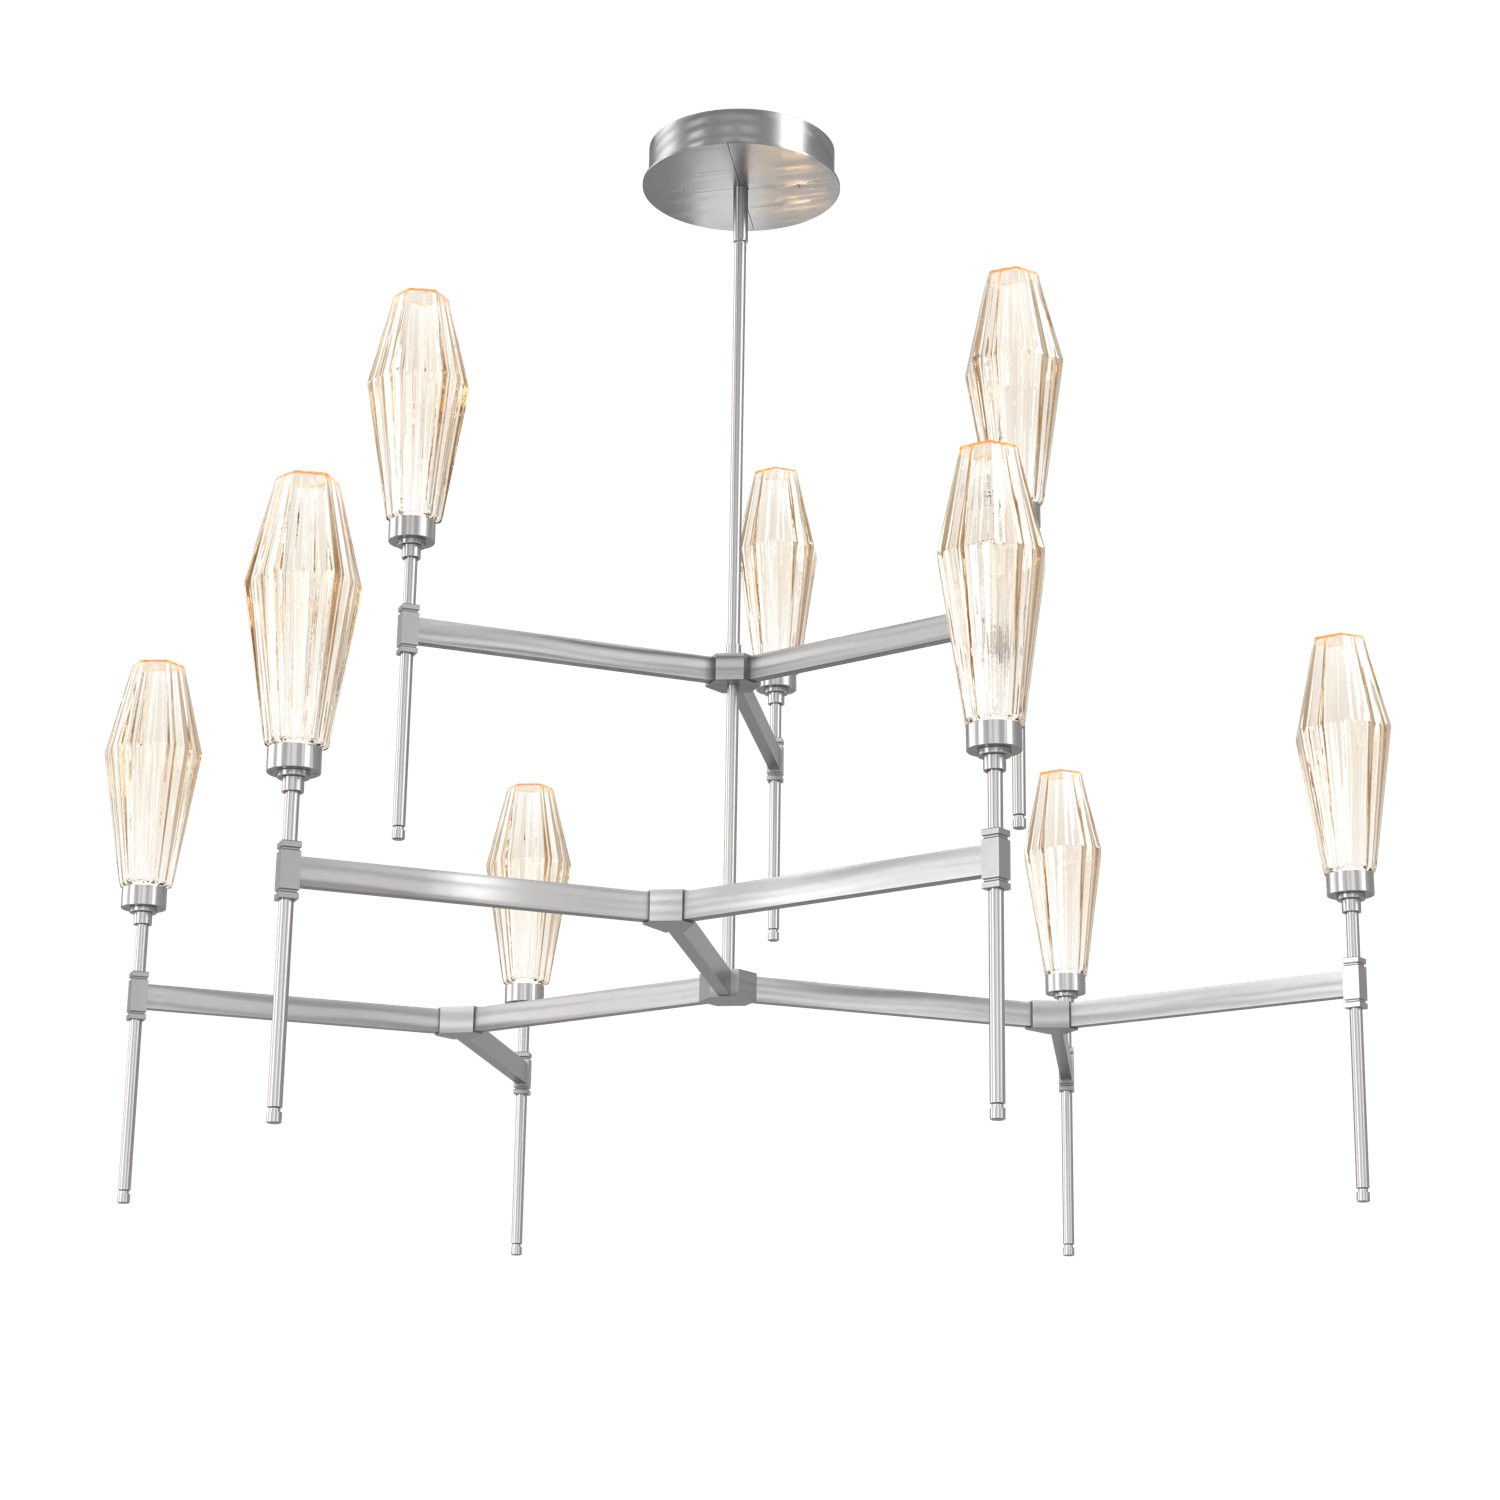 CHB0049-54-SN-RA-Hammerton-Studio-Aalto-54-inch-round-two-tier-belvedere-chandelier-with-satin-nickel-finish-and-optic-ribbed-amber-glass-shades-and-LED-lamping